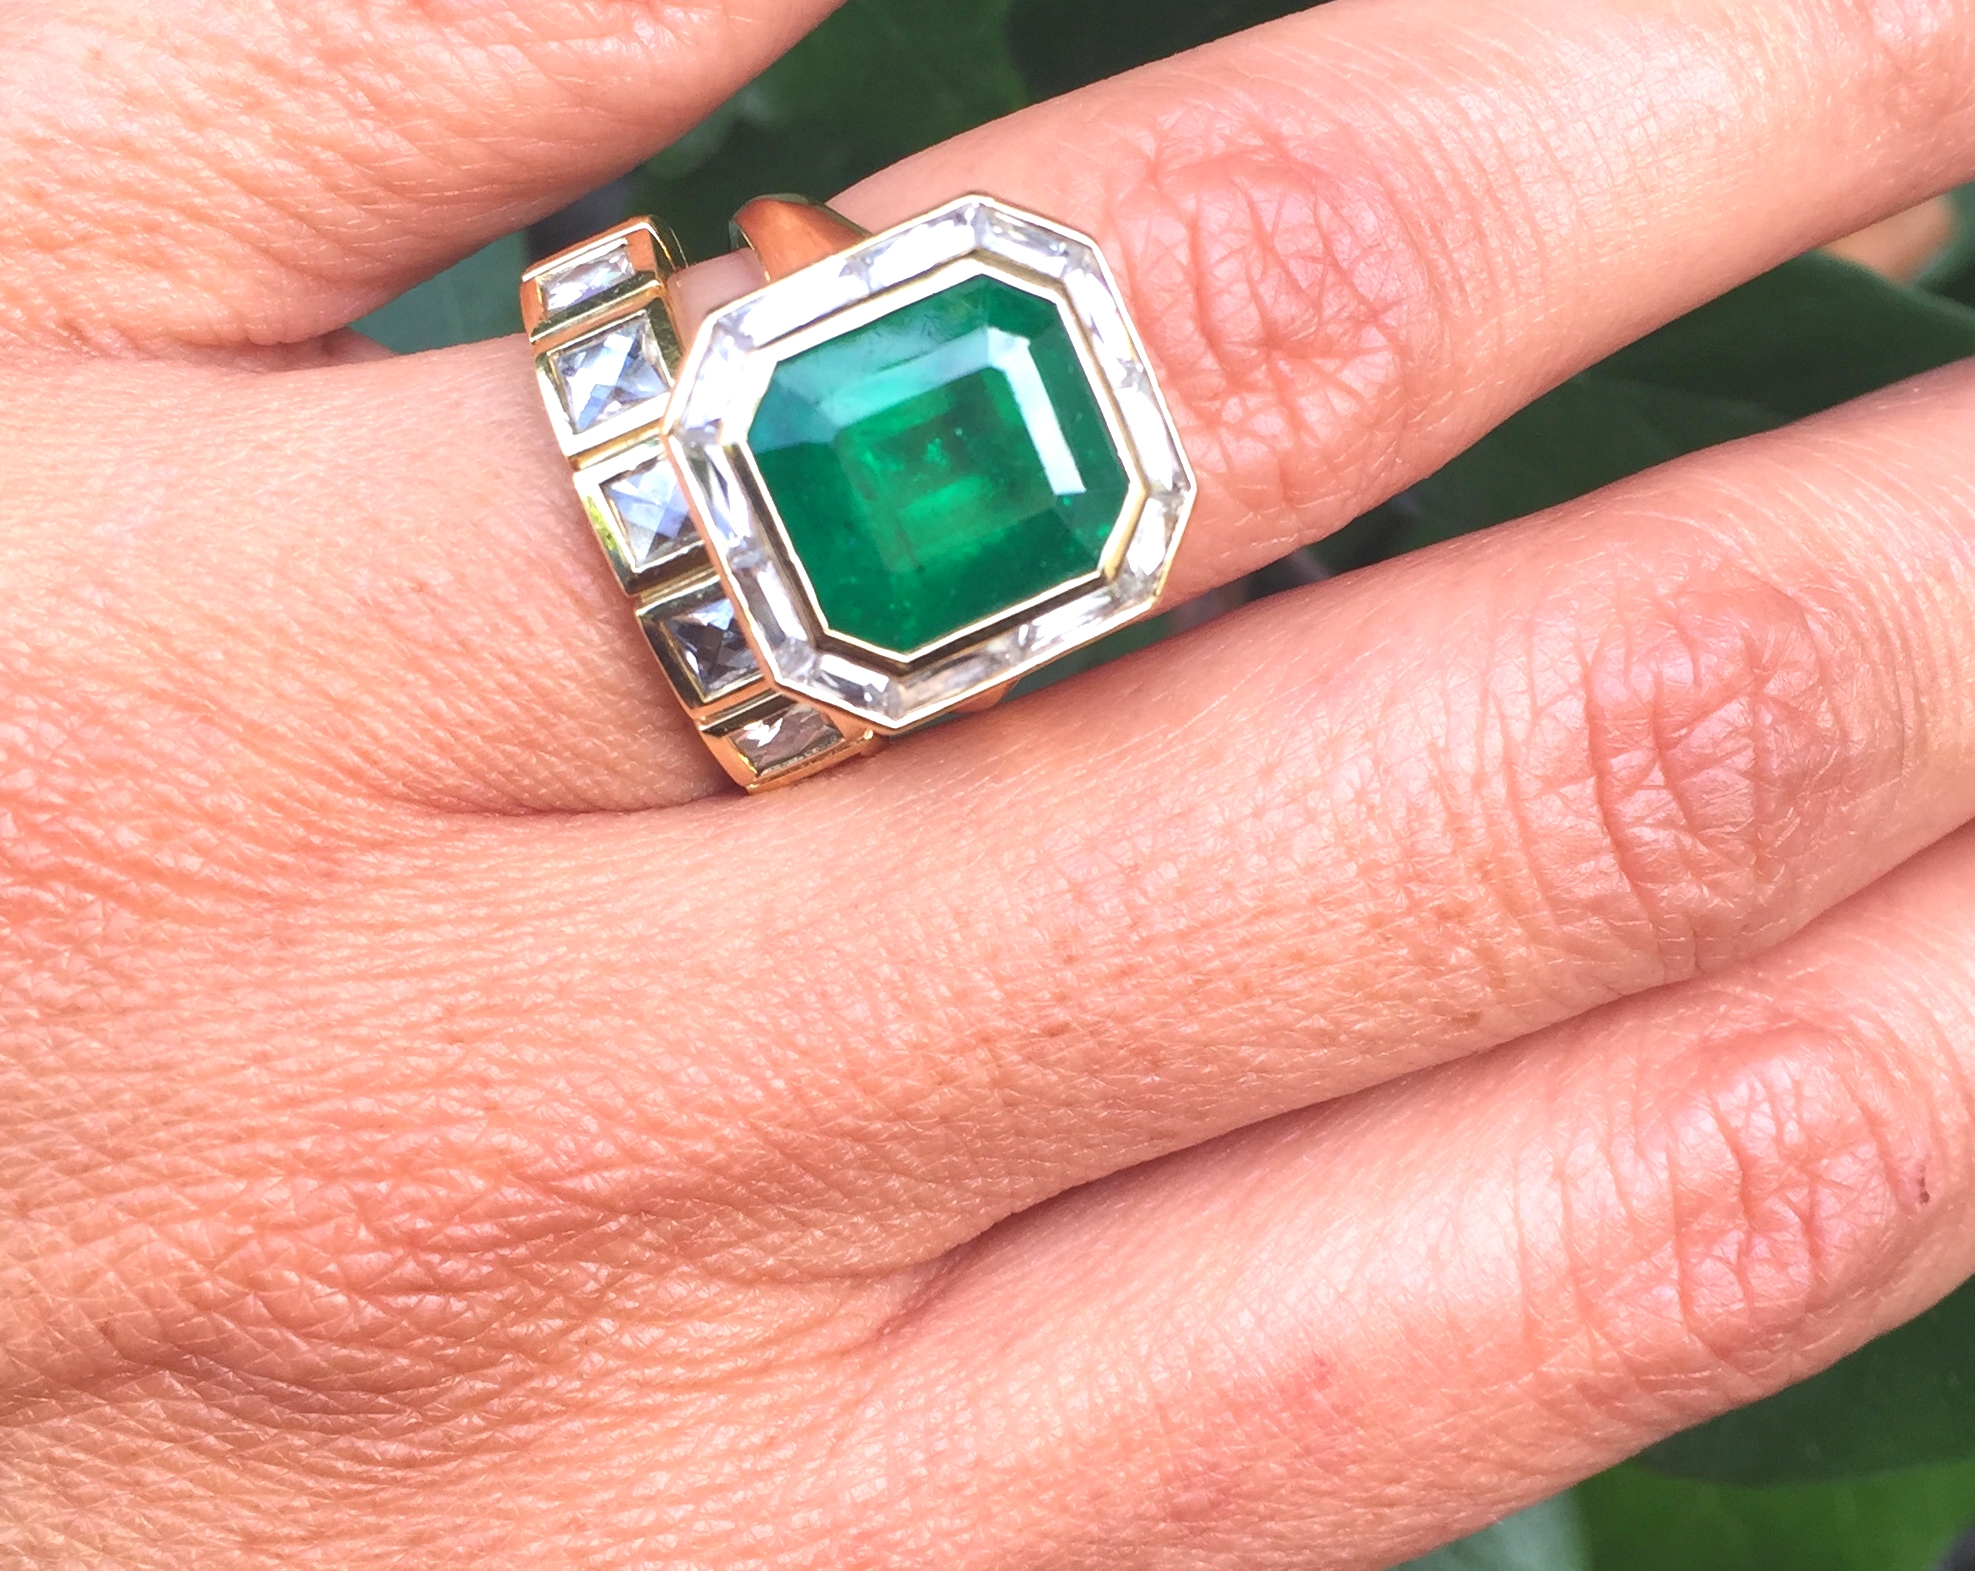   This fabulous emerald and baguette diamond ring was created for Corina by Ari and it makes us believe in love, OK?!  